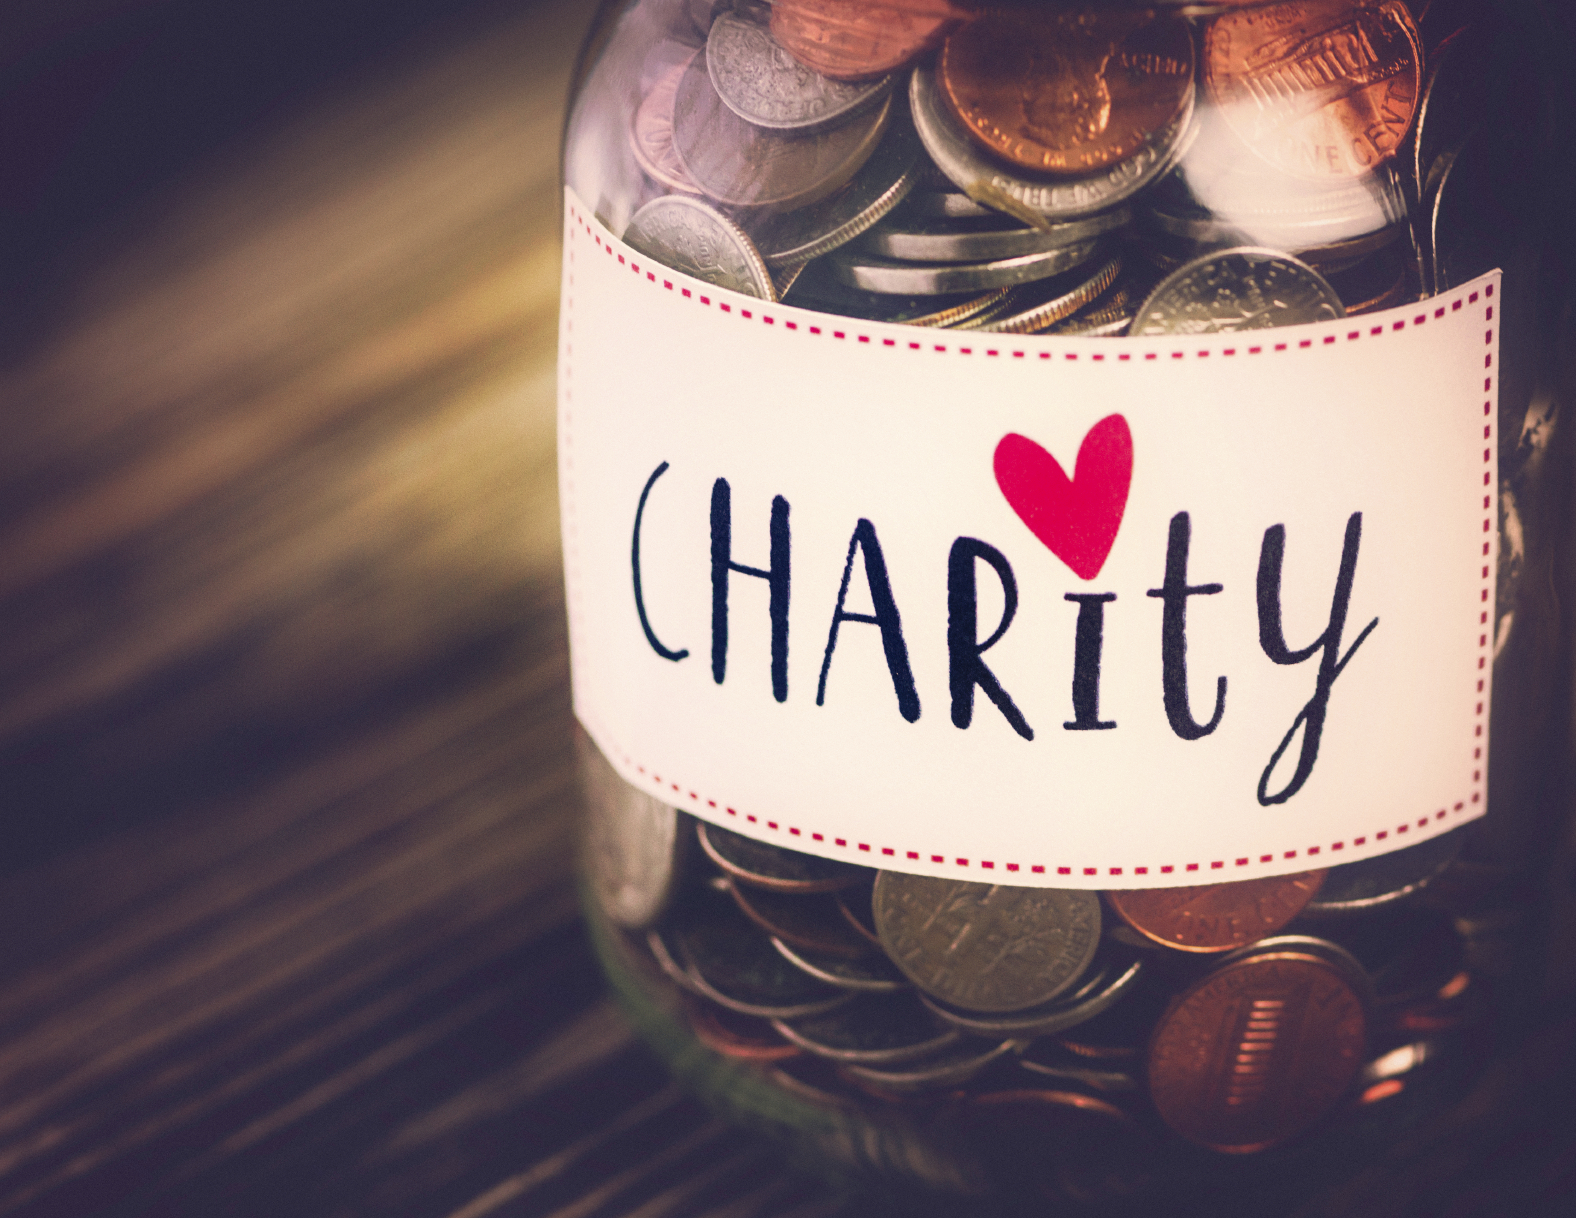 New banking guidance for charities